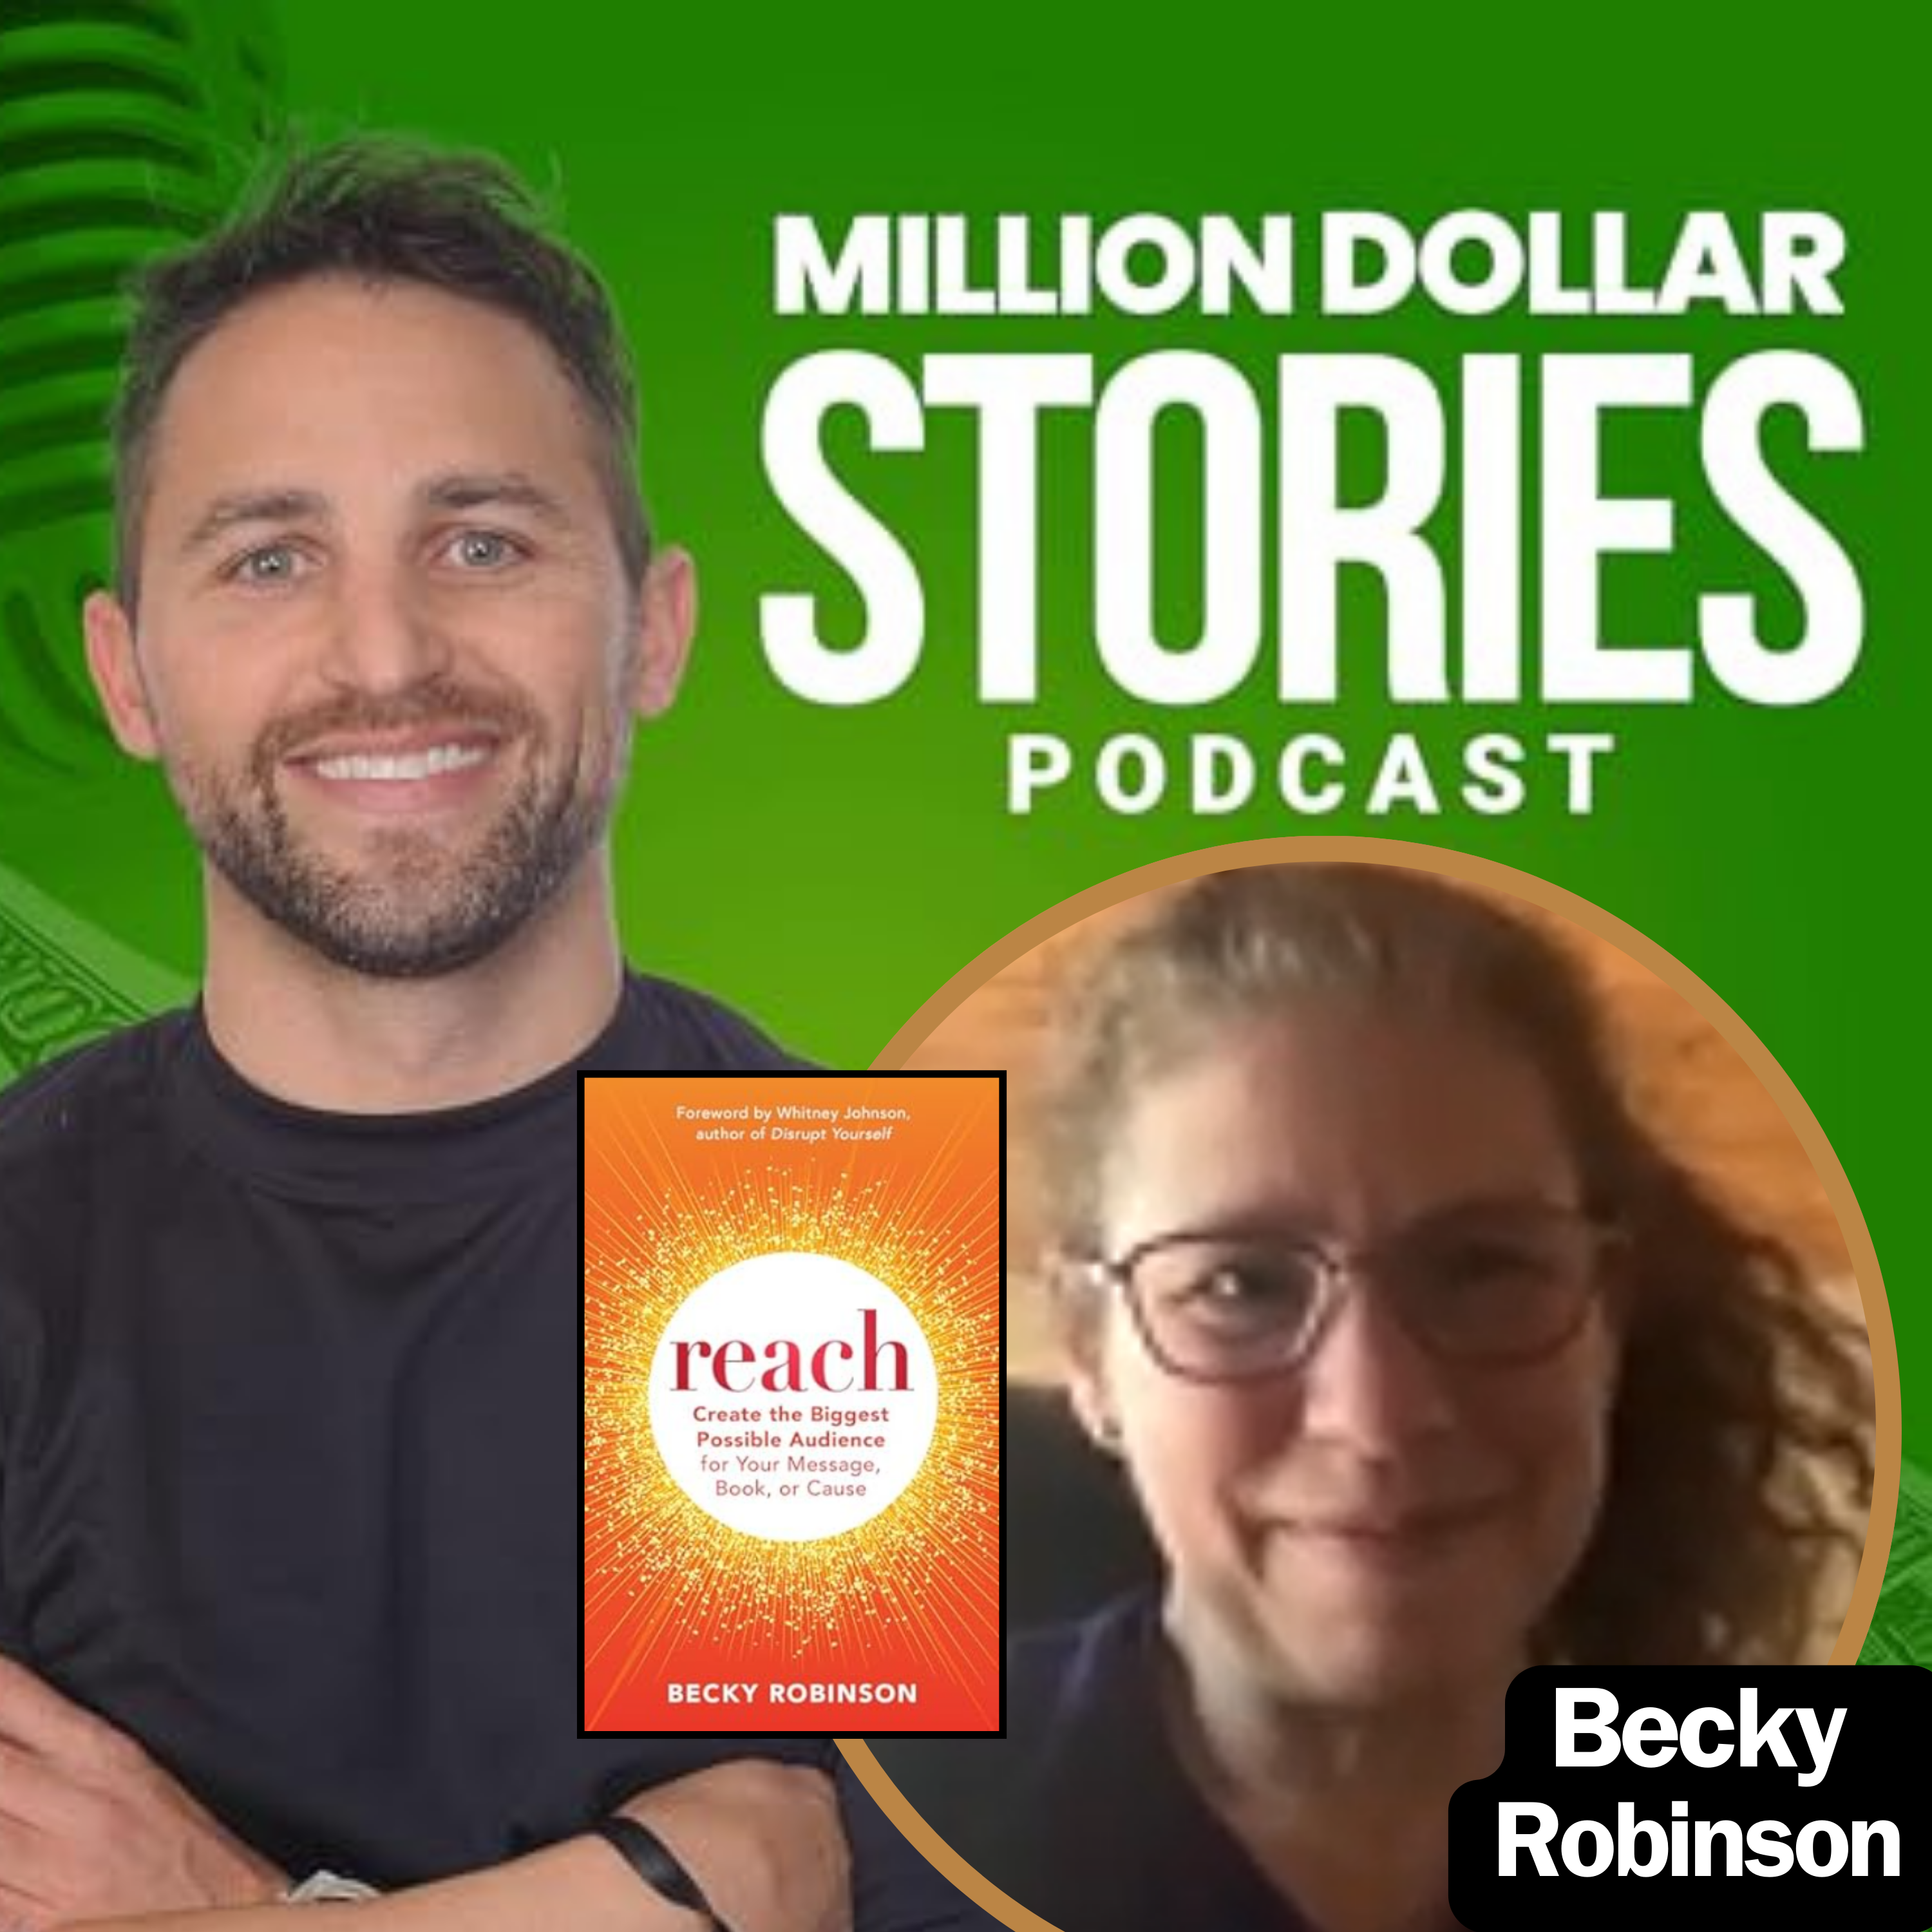 Becky Robinson – Author of “Reach: Create the Biggest Possible Audience for Your Message, Book, or Cause”